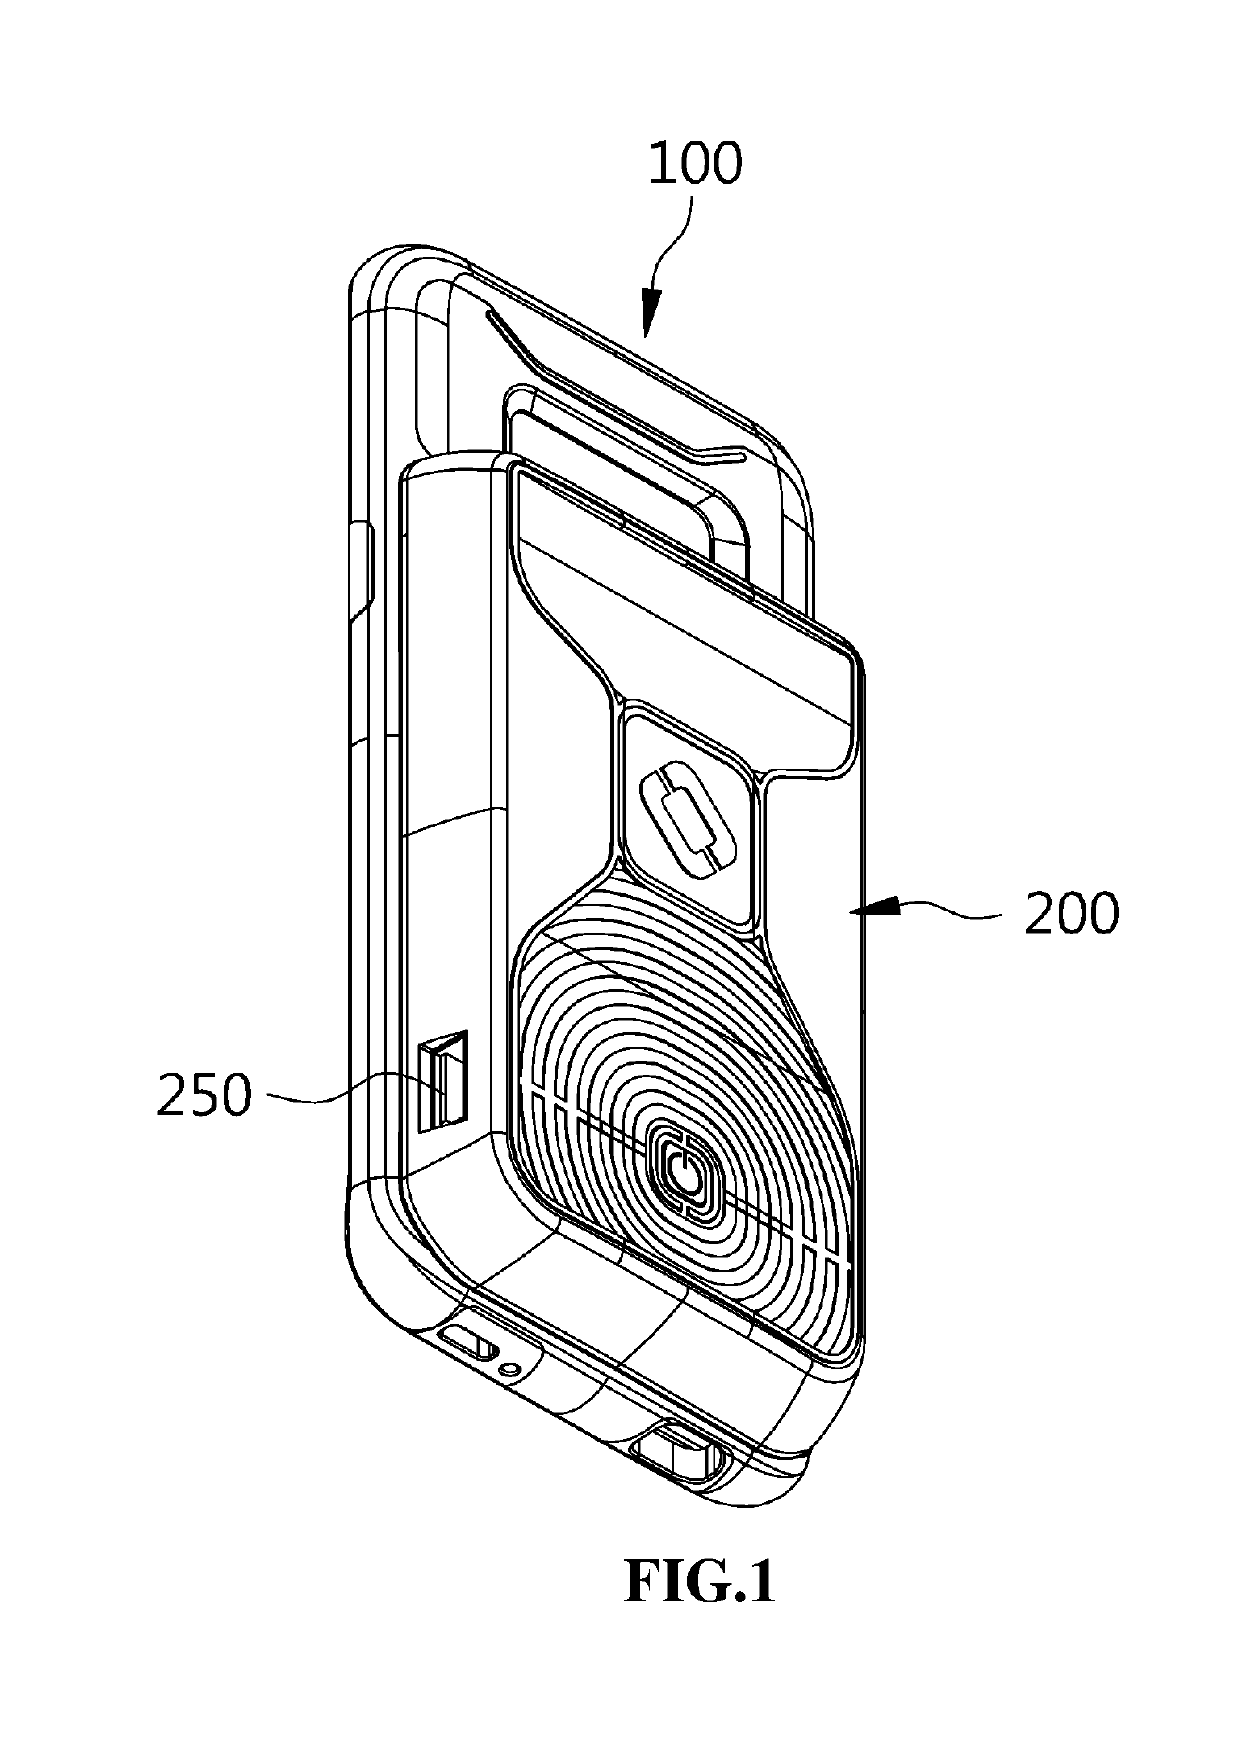 Casing-type Charging module for mobile device